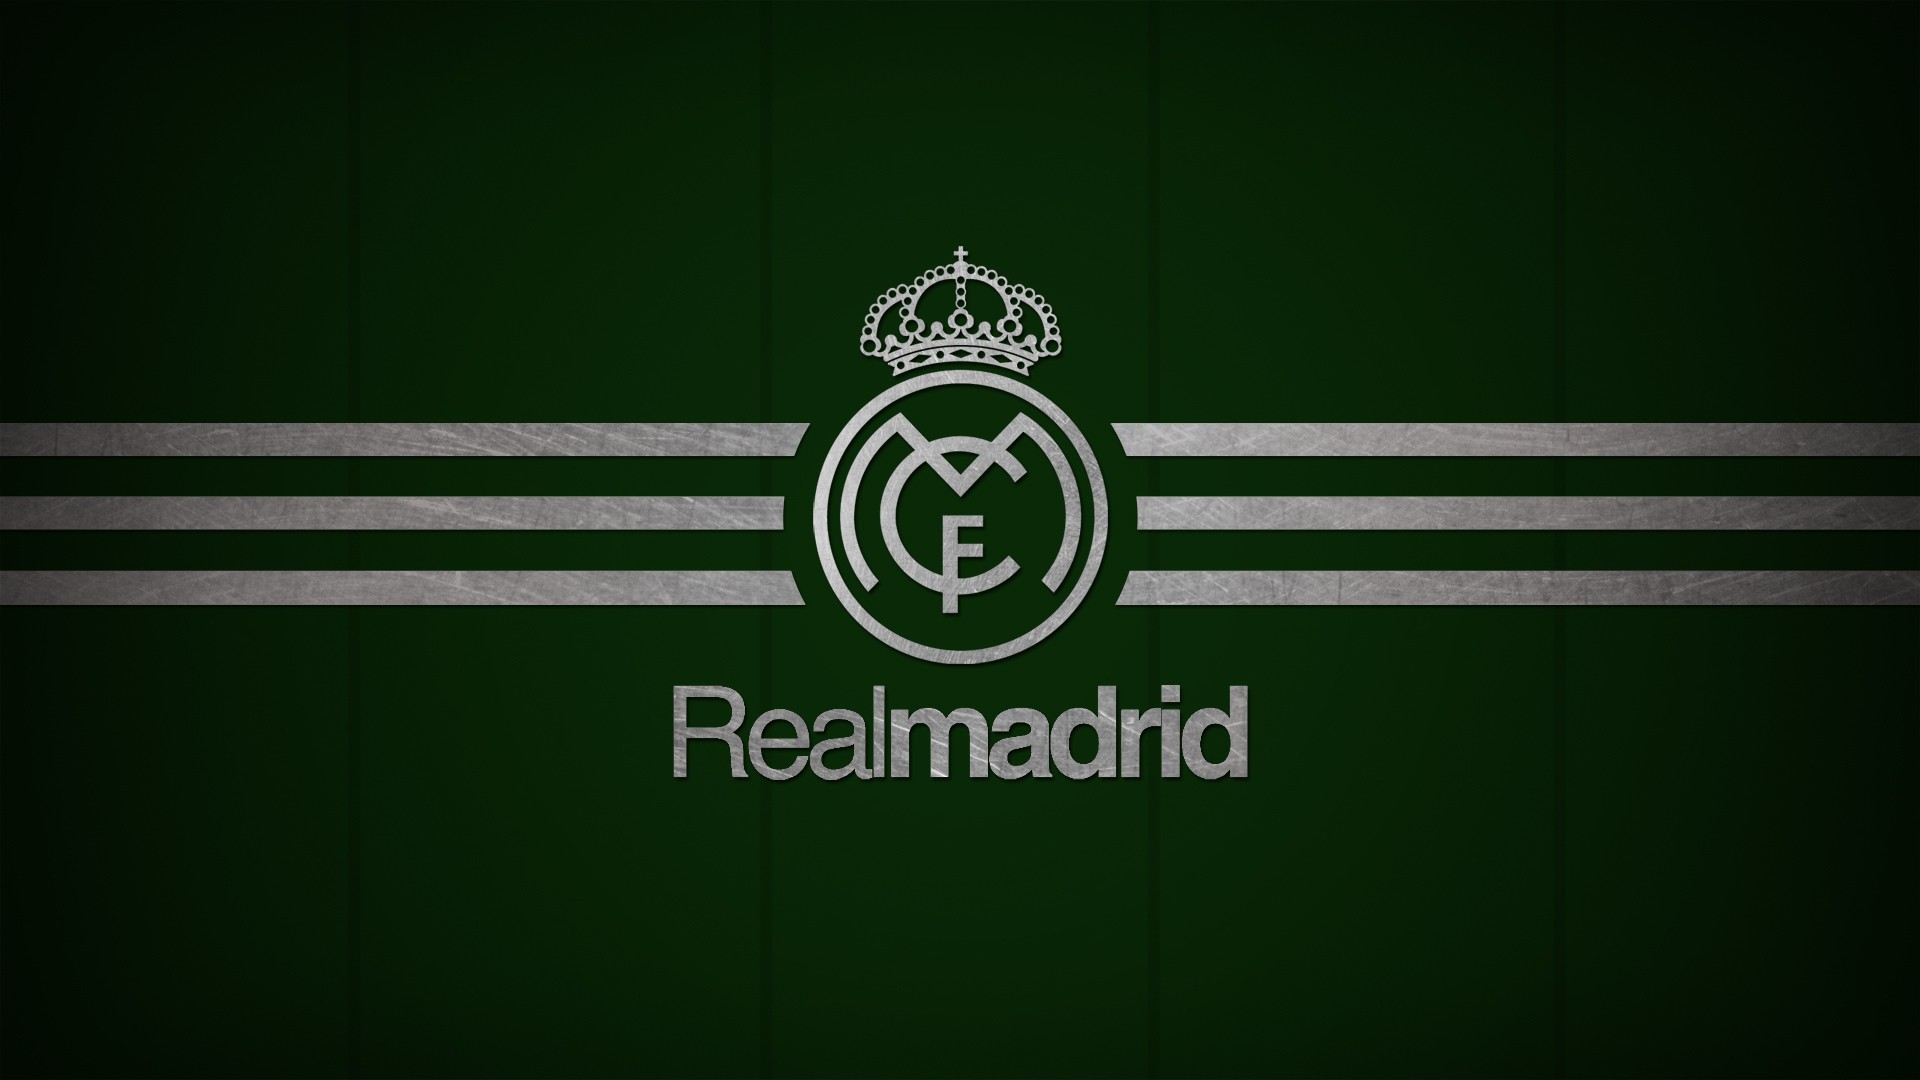 Real Madrid Wallpaper With Resolution 1920X1080 pixel. You can make this wallpaper for your Mac or Windows Desktop Background, iPhone, Android or Tablet and another Smartphone device for free